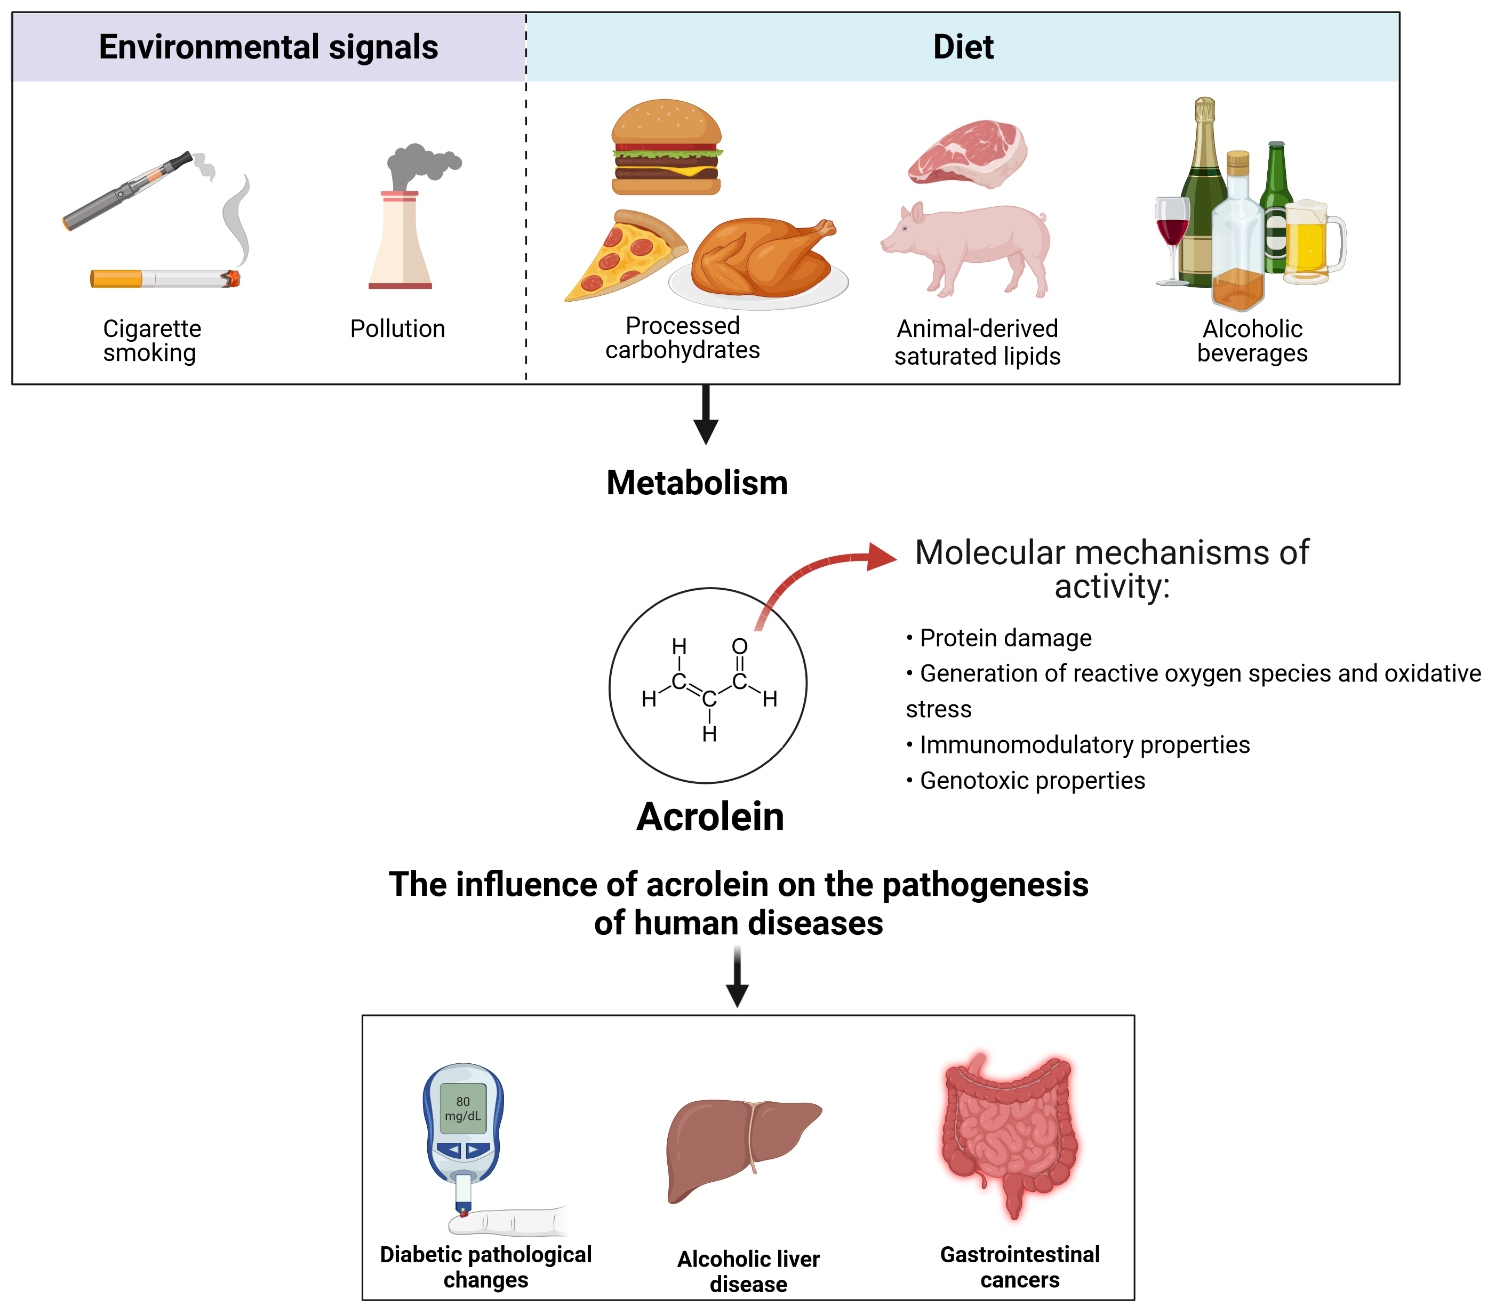 IJMS | Free Full-Text | Diet as a Source of Acrolein: Molecular